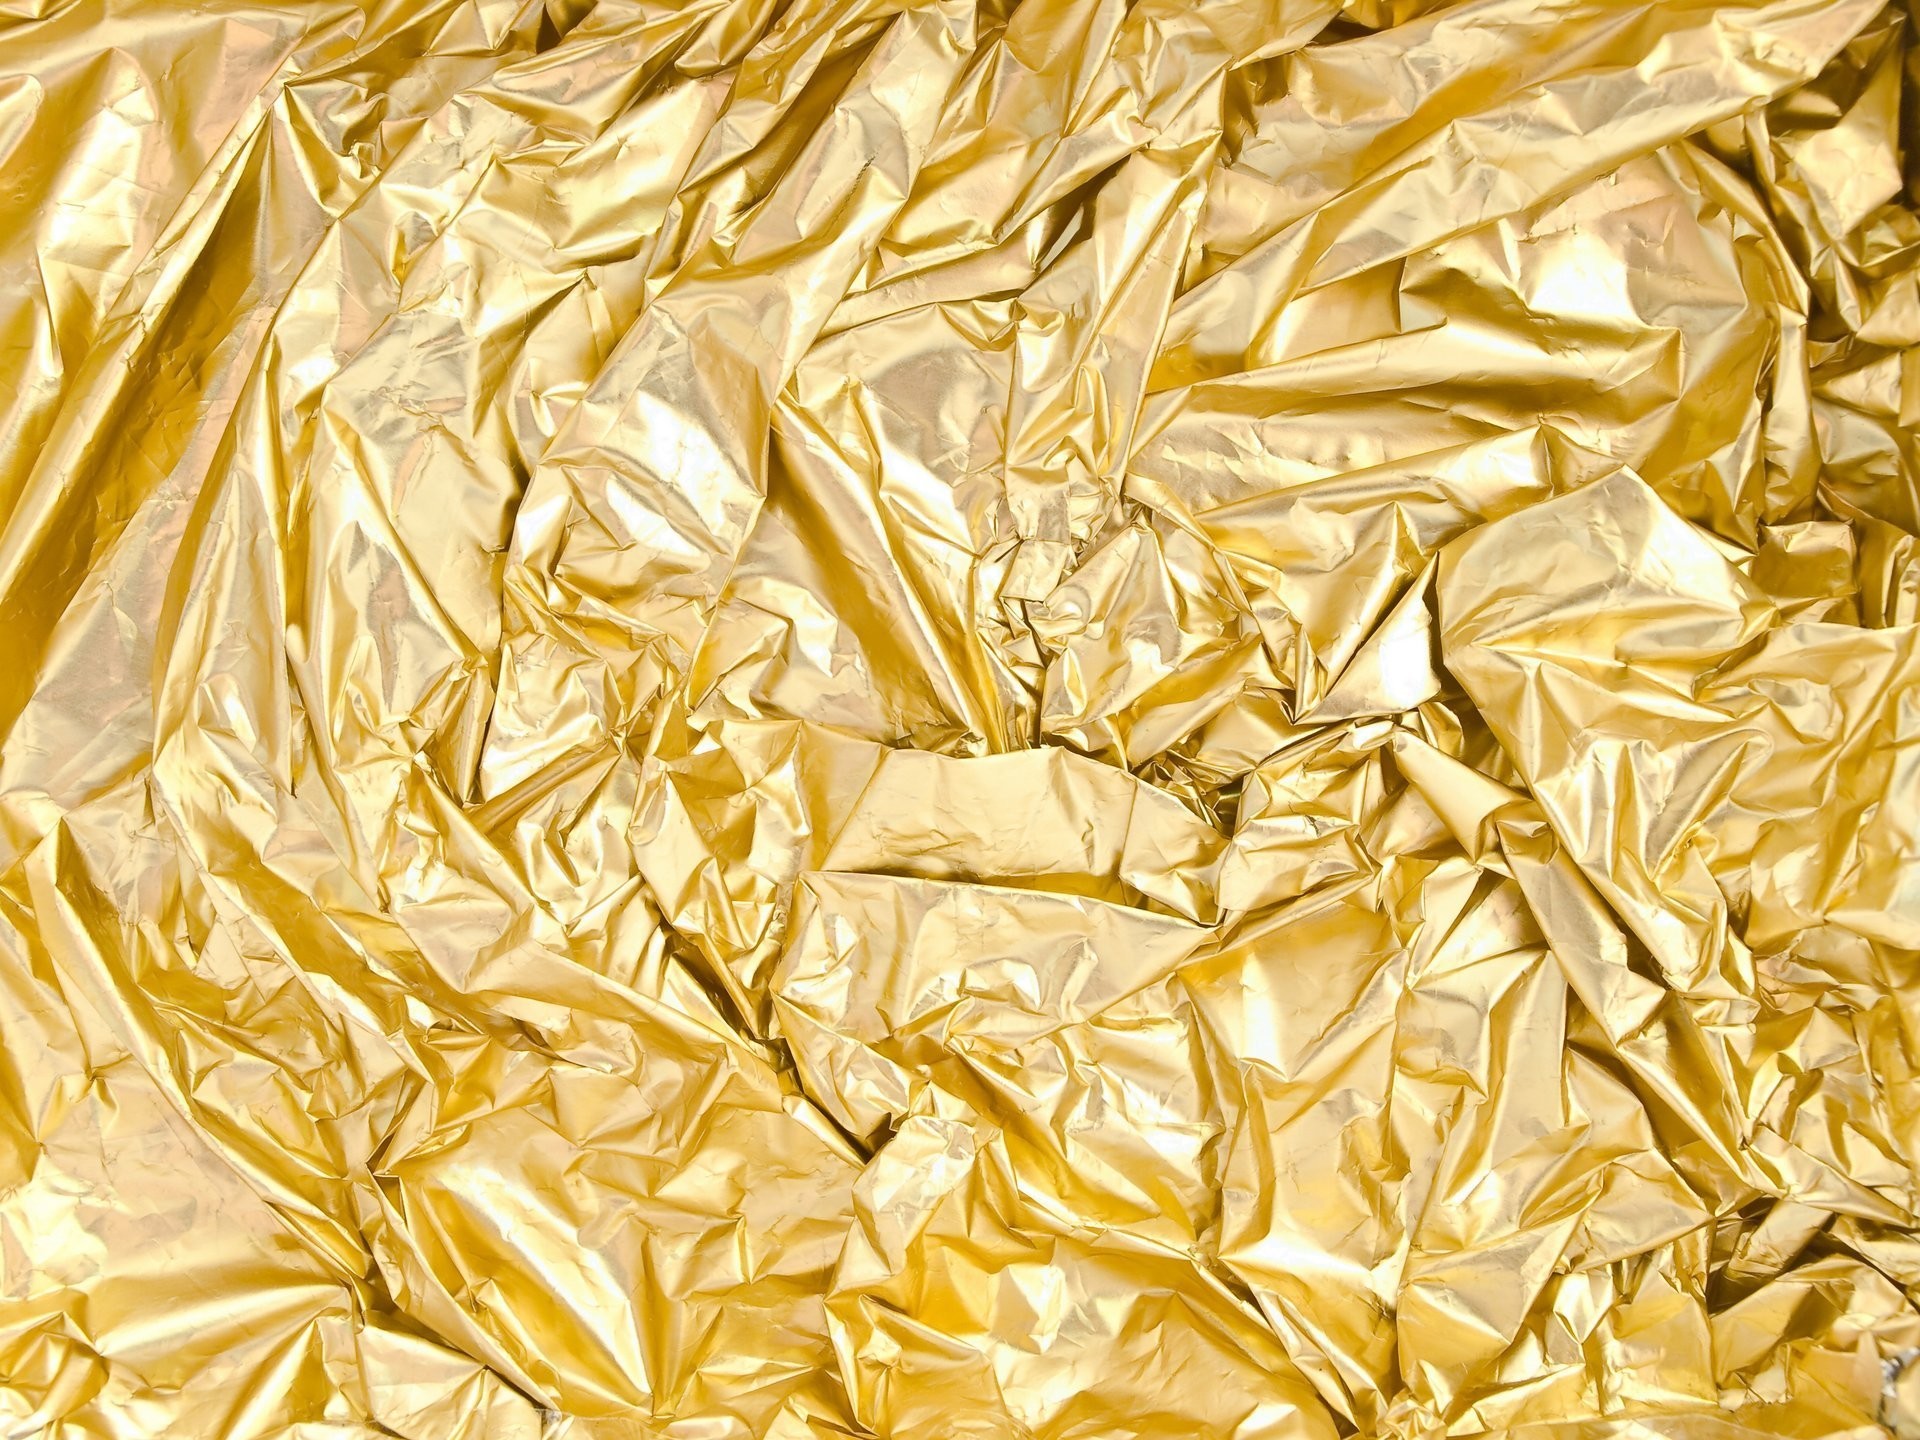 Gold Metal Texture Foil Tracery Shine Radiance Gold - Weight Gold Gallant - HD Wallpaper 